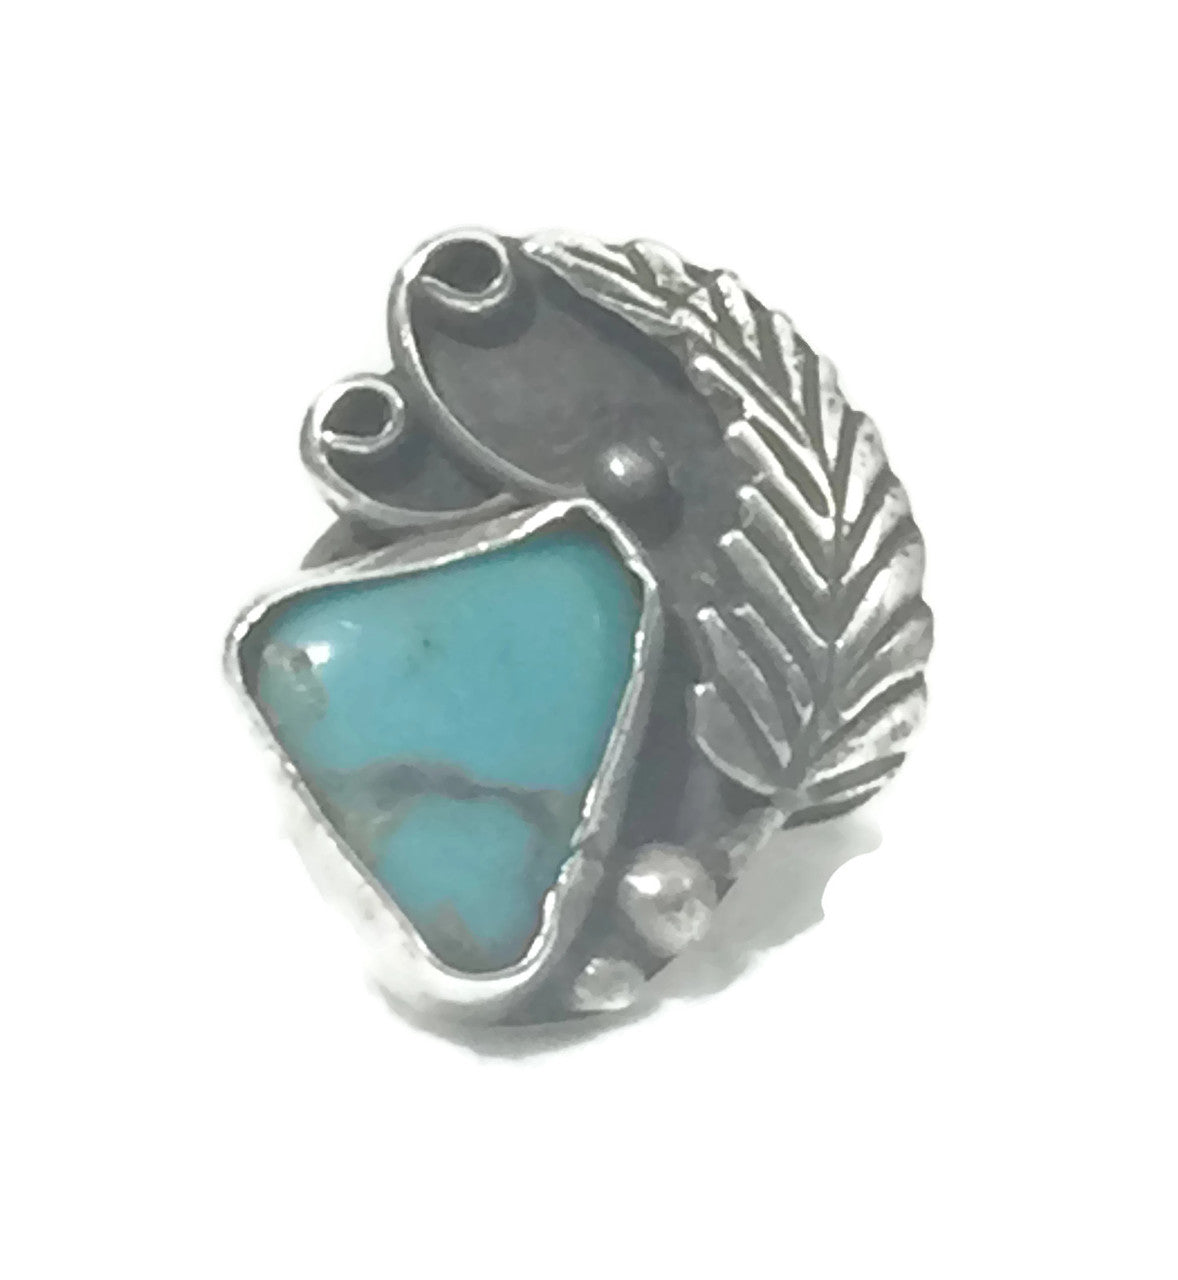 Turquoise Ring Vintage Southwest Sterling Silver Ring Size 5.25